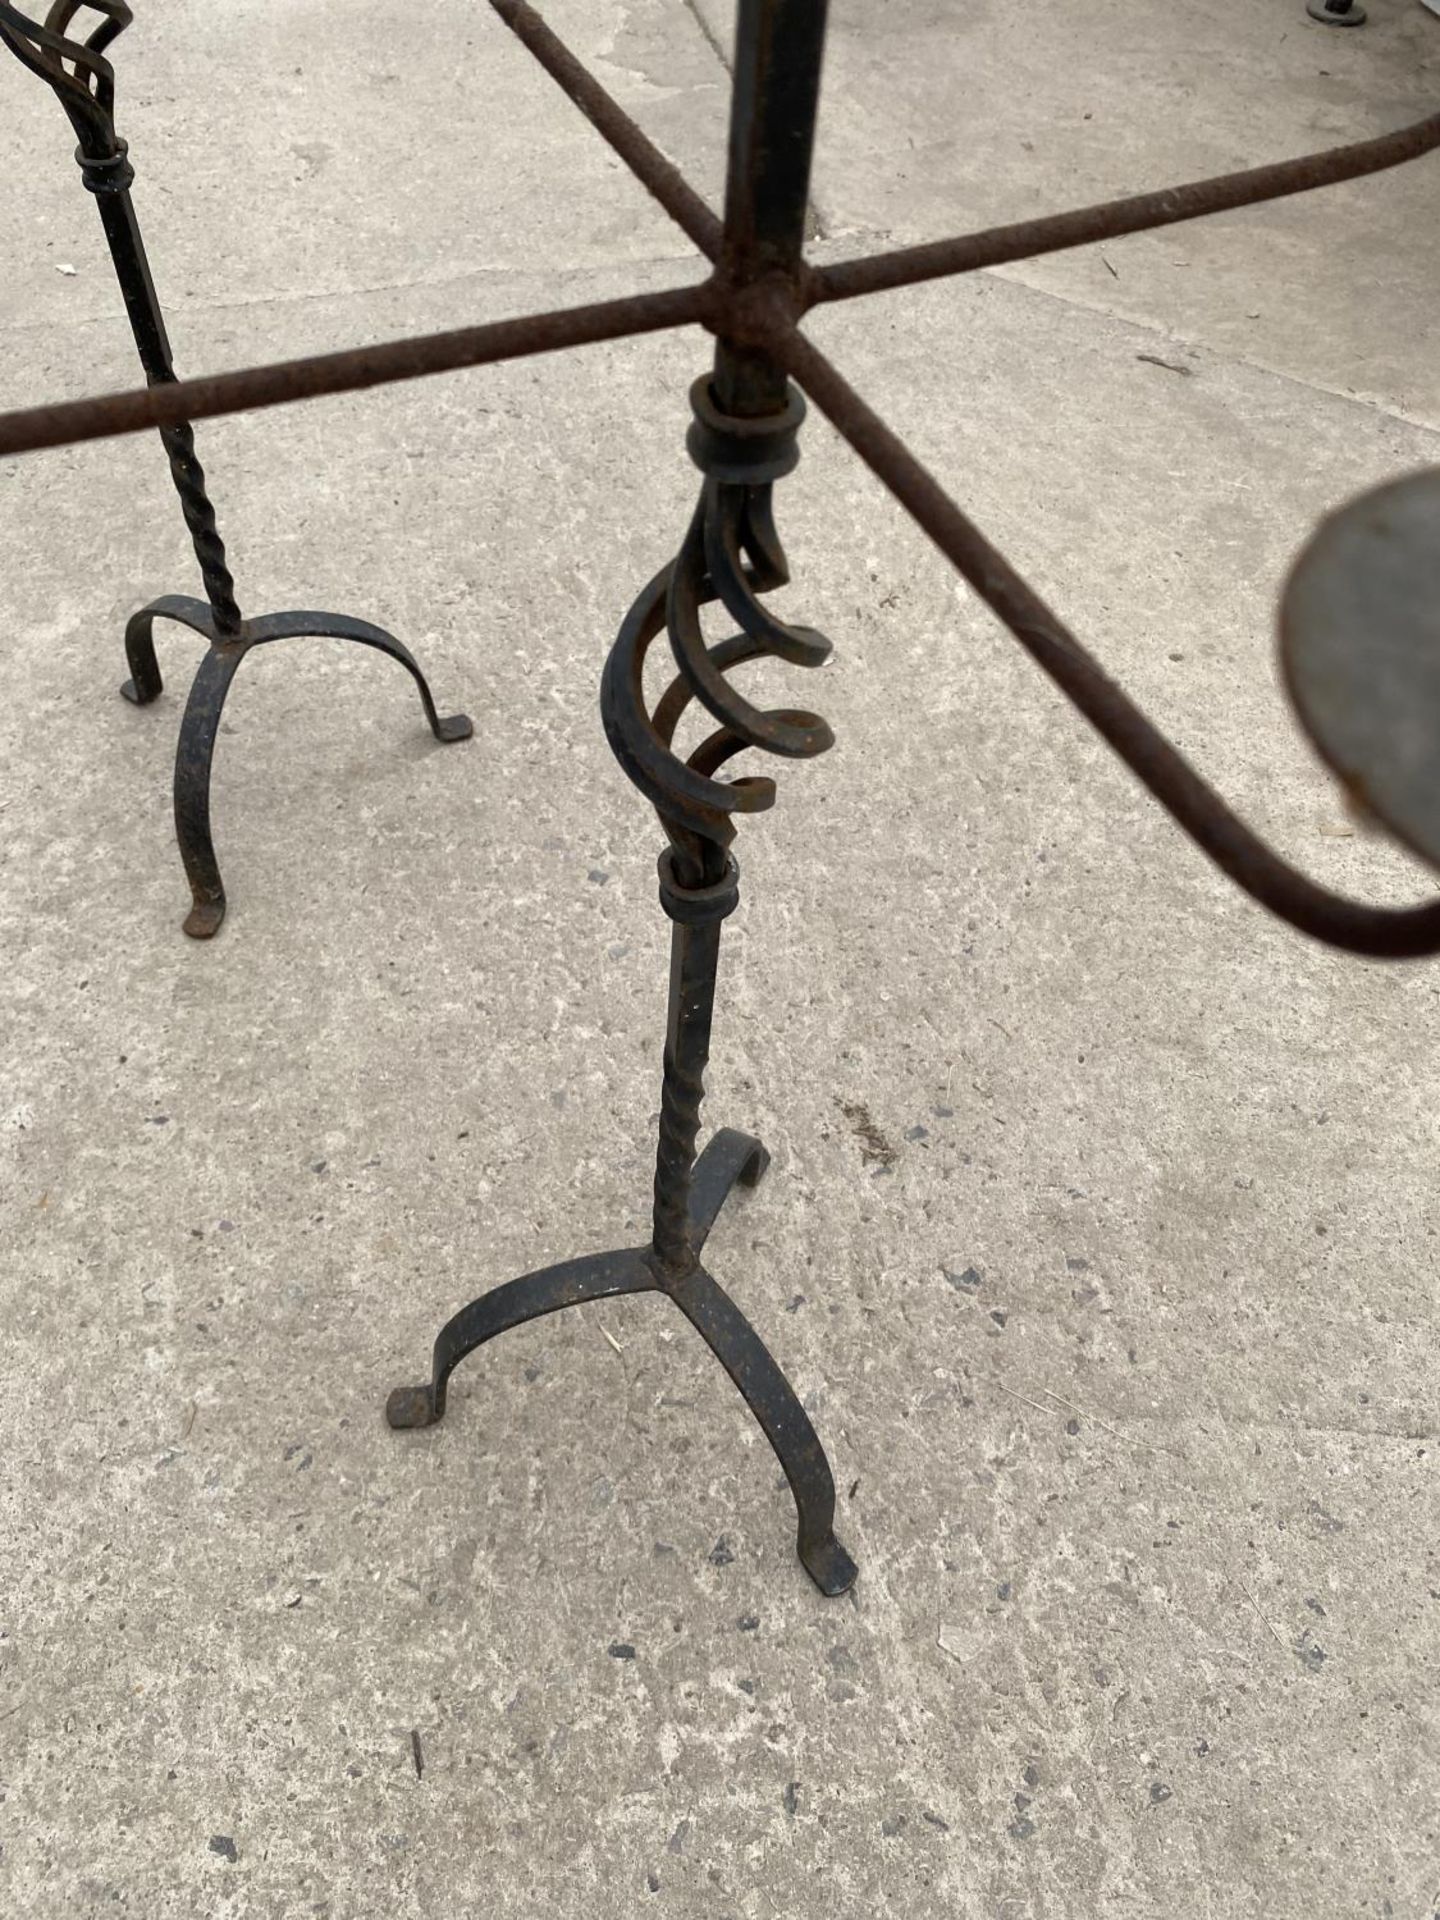 A PAIR OF DECORATIVE WROUGHT IRON CANDLE HOLDERS - Image 5 of 10